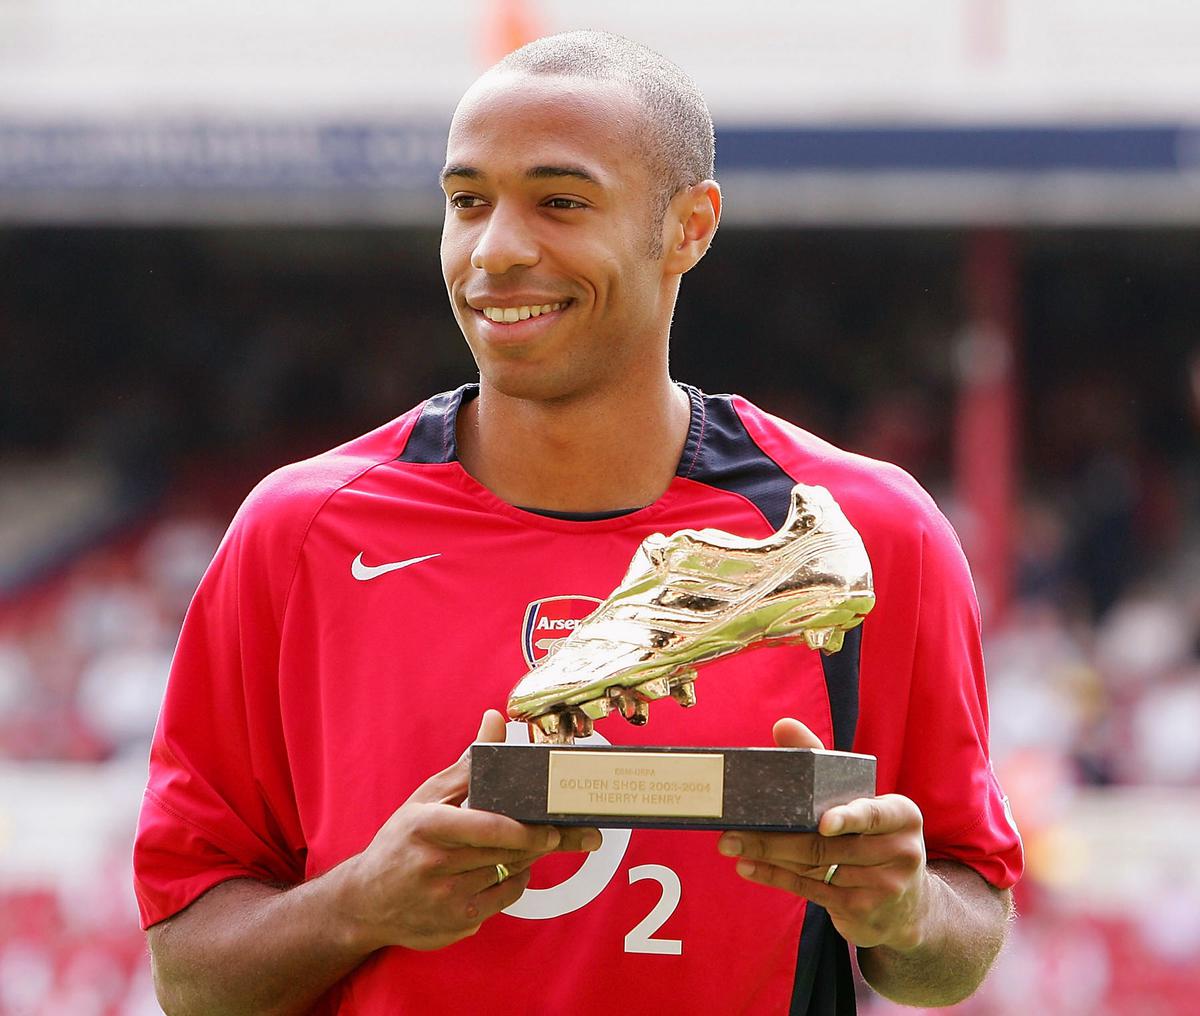 After being a part of Arsenal’s squad for eight years, including the 2003-04 ‘invincible’ season where the London club went on to clinch the league title without a loss, Thierry Henry left the club in 2007 to Barcelona. 